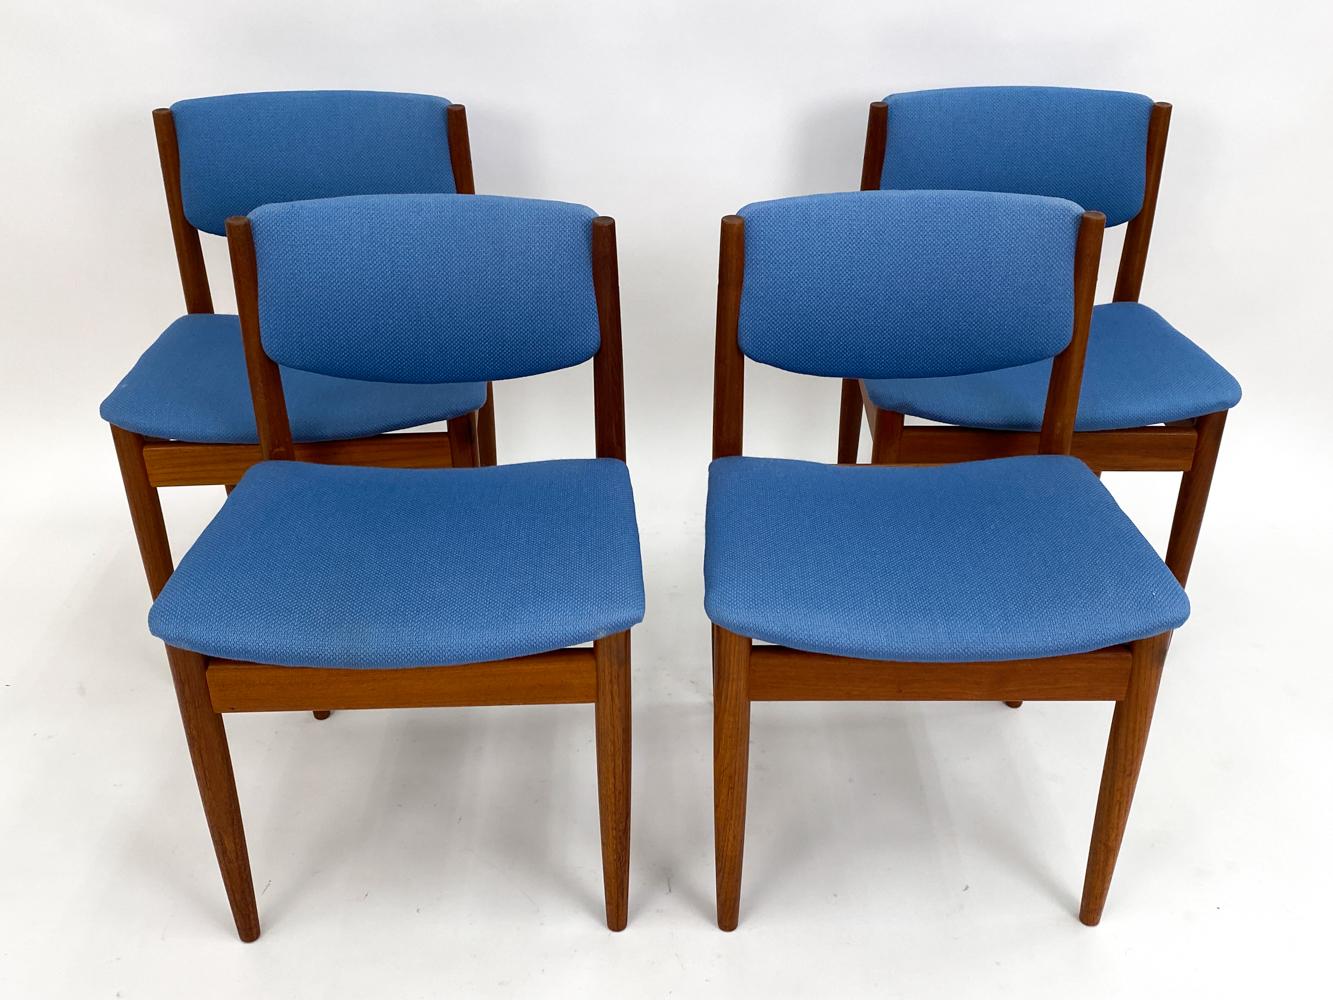 Step into the golden era of mid-century design with this exquisite set of four teak Finn Juhl Model 197 chairs. A testament to Juhl’s unparalleled craftsmanship and visionary style, each chair is sculpted from rich, warm teak wood that tells tales